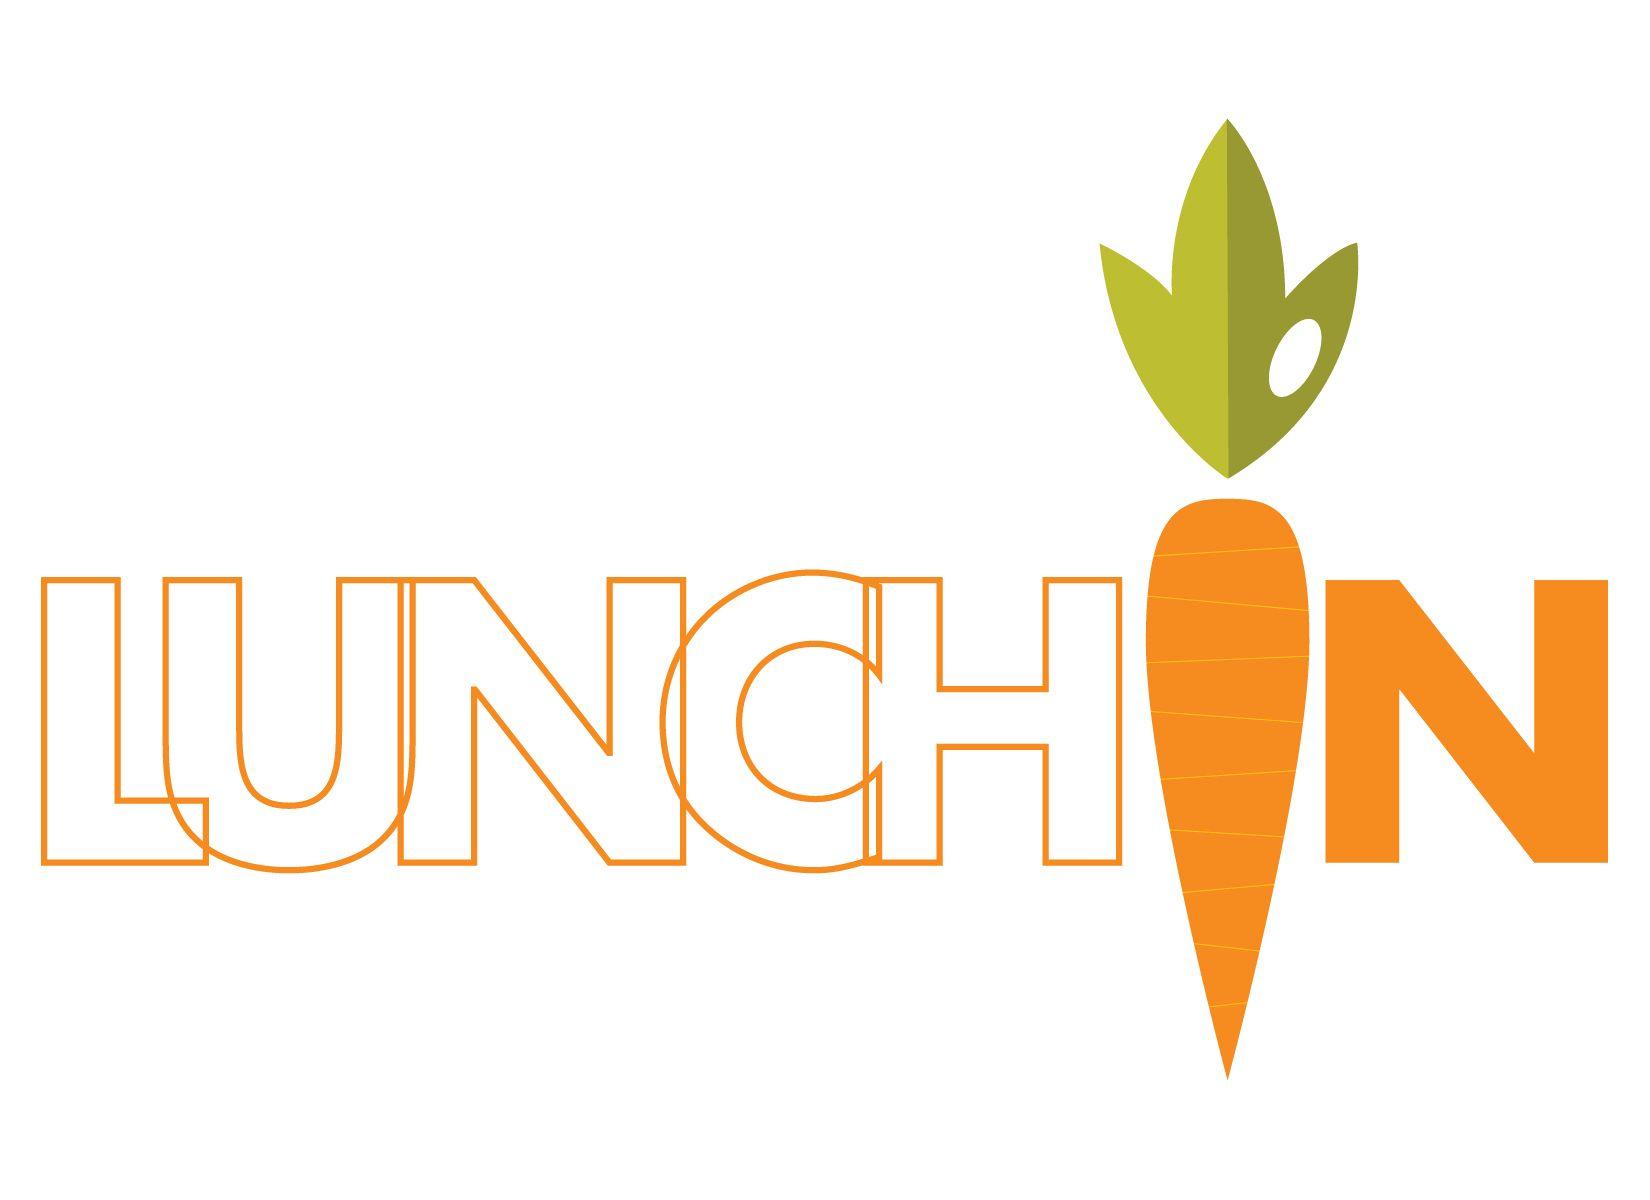 Lunch Logo - Lunch In logo | Advocates for Health in Action